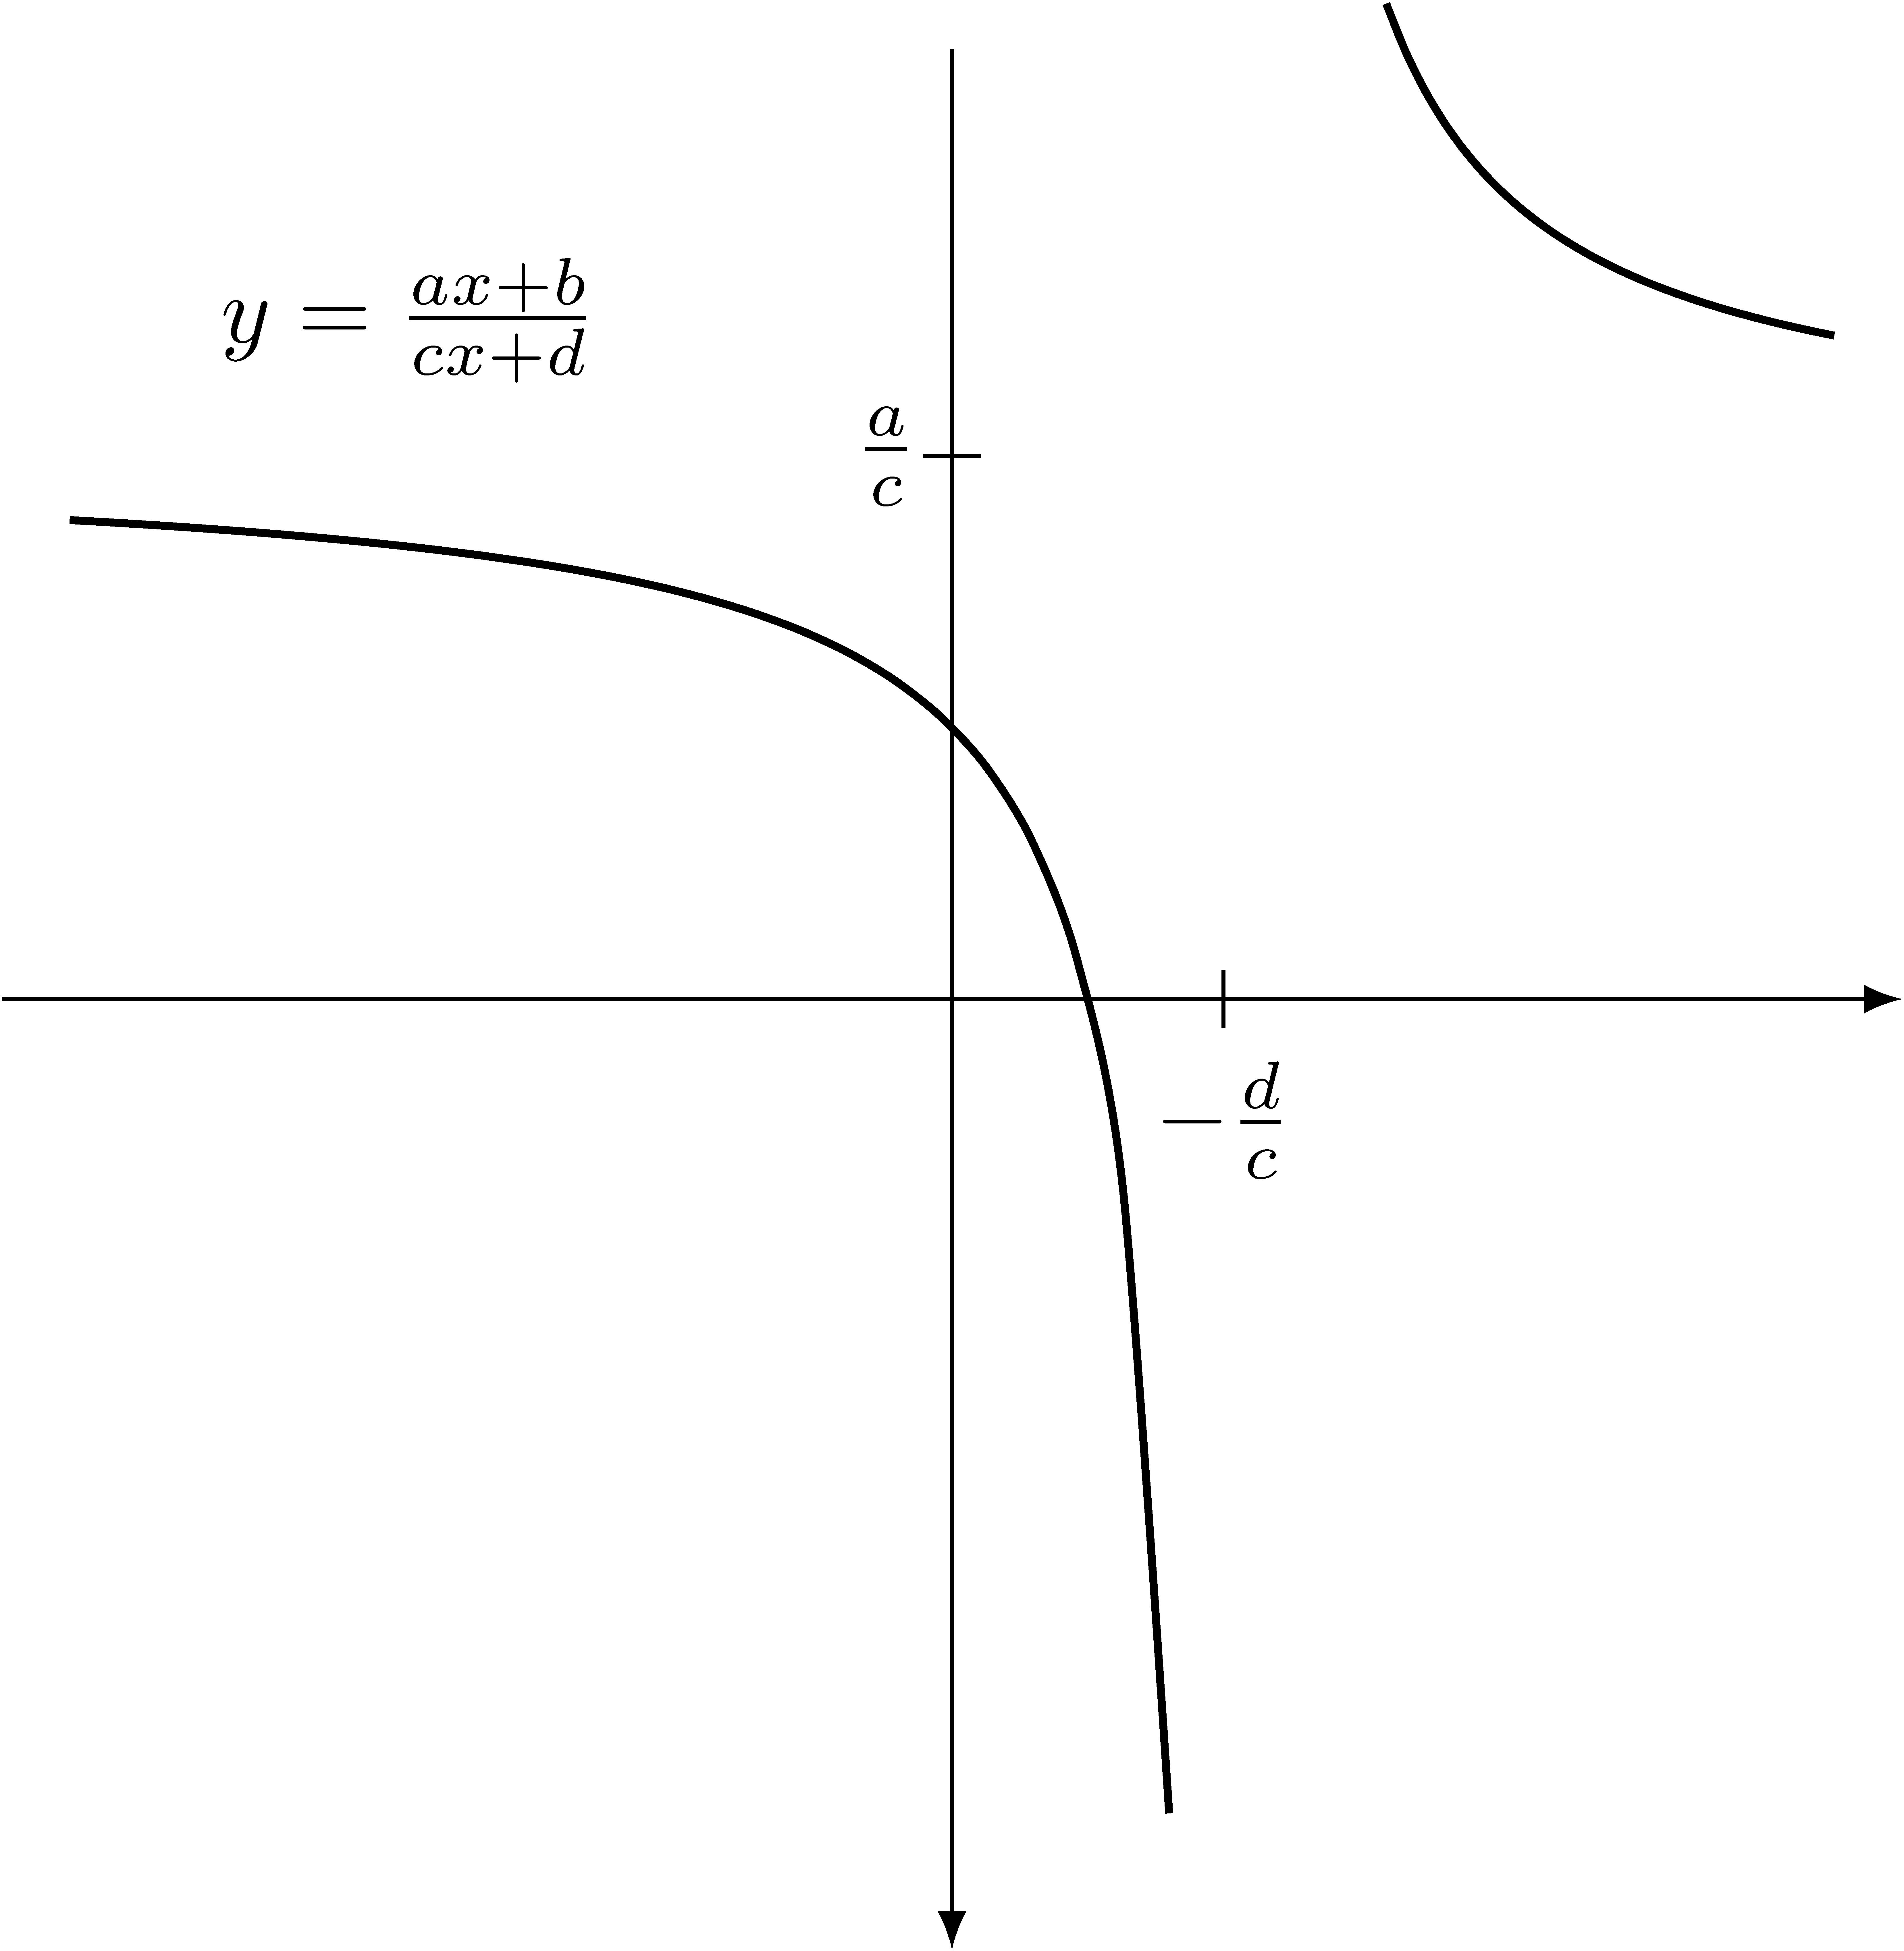 General Linear Fractional Transformation